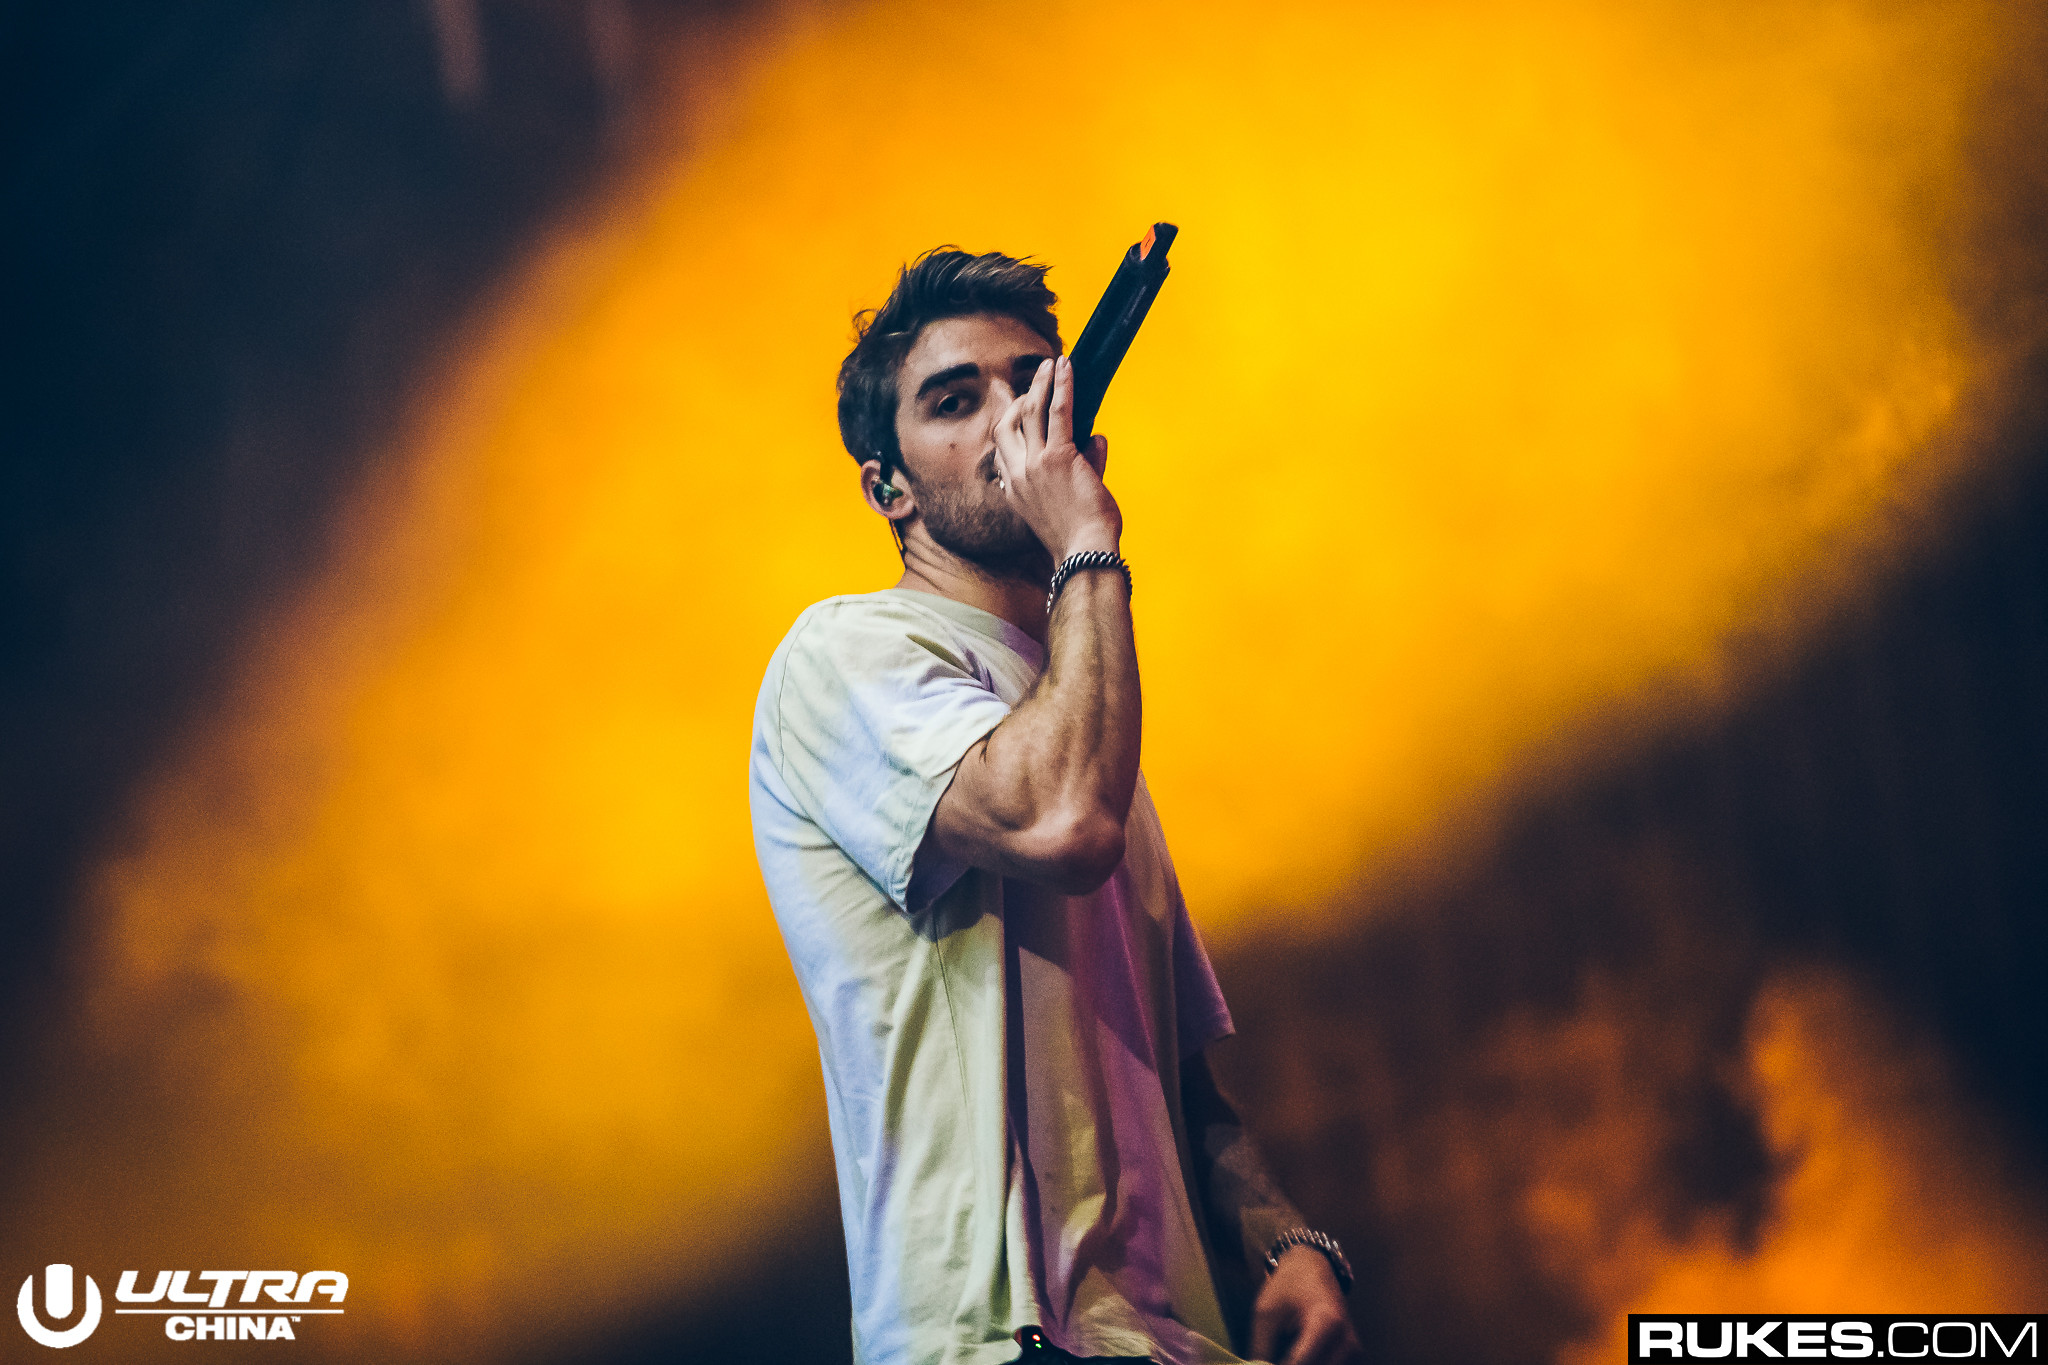 The Chainsmokers Drew Taggart - Sick Boy Chainsmokers Singer , HD Wallpaper & Backgrounds